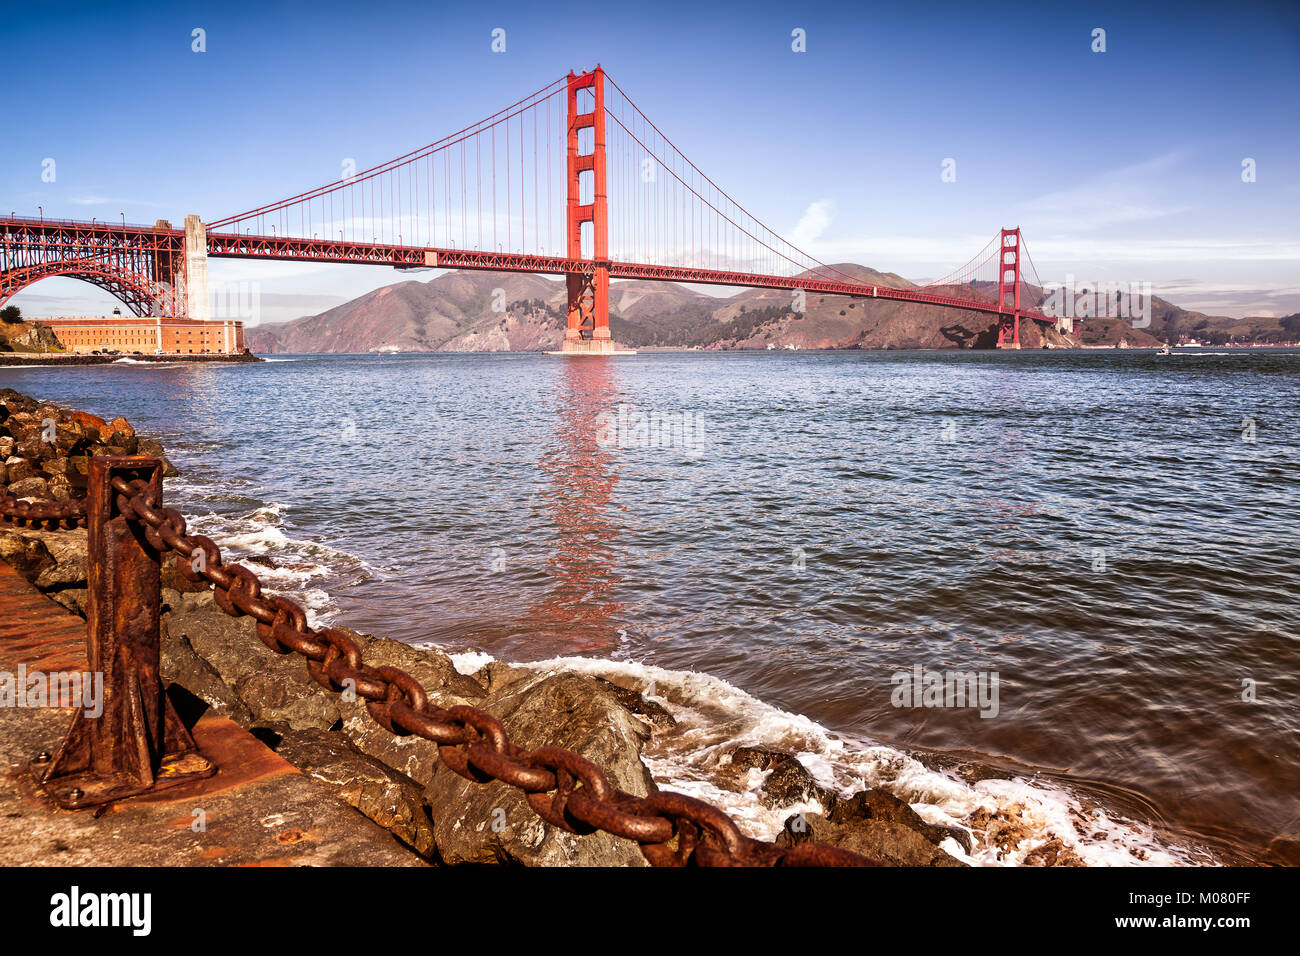 Golden Gate Bridge. Foreground of water's edge, rocky boulders and a heavy rusty chain guardrail. Stock Photo